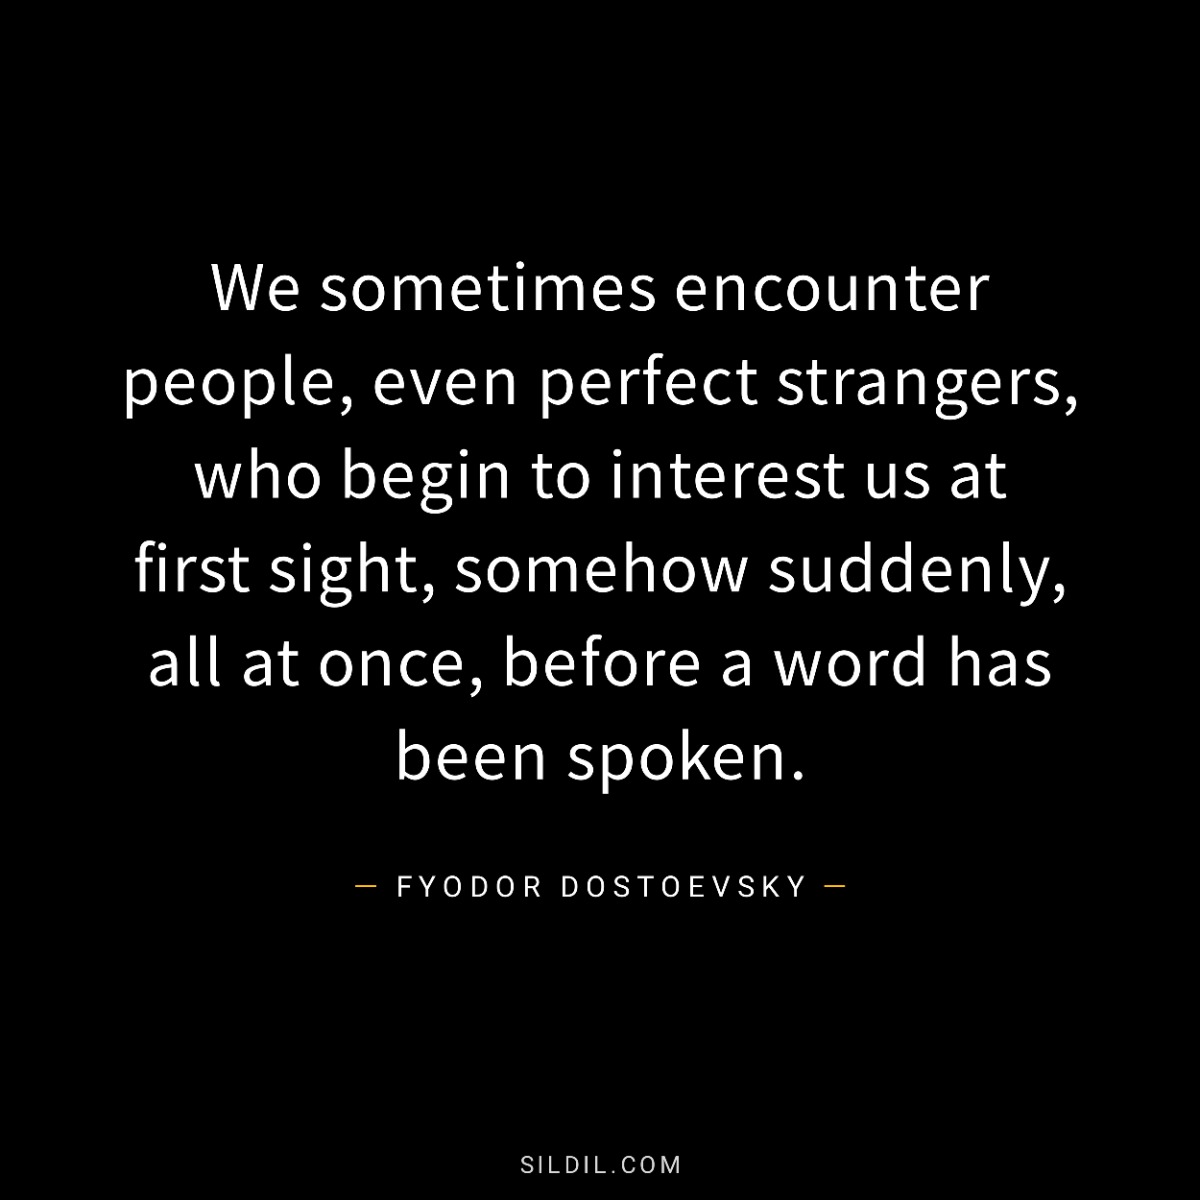 We sometimes encounter people, even perfect strangers, who begin to interest us at first sight, somehow suddenly, all at once, before a word has been spoken.